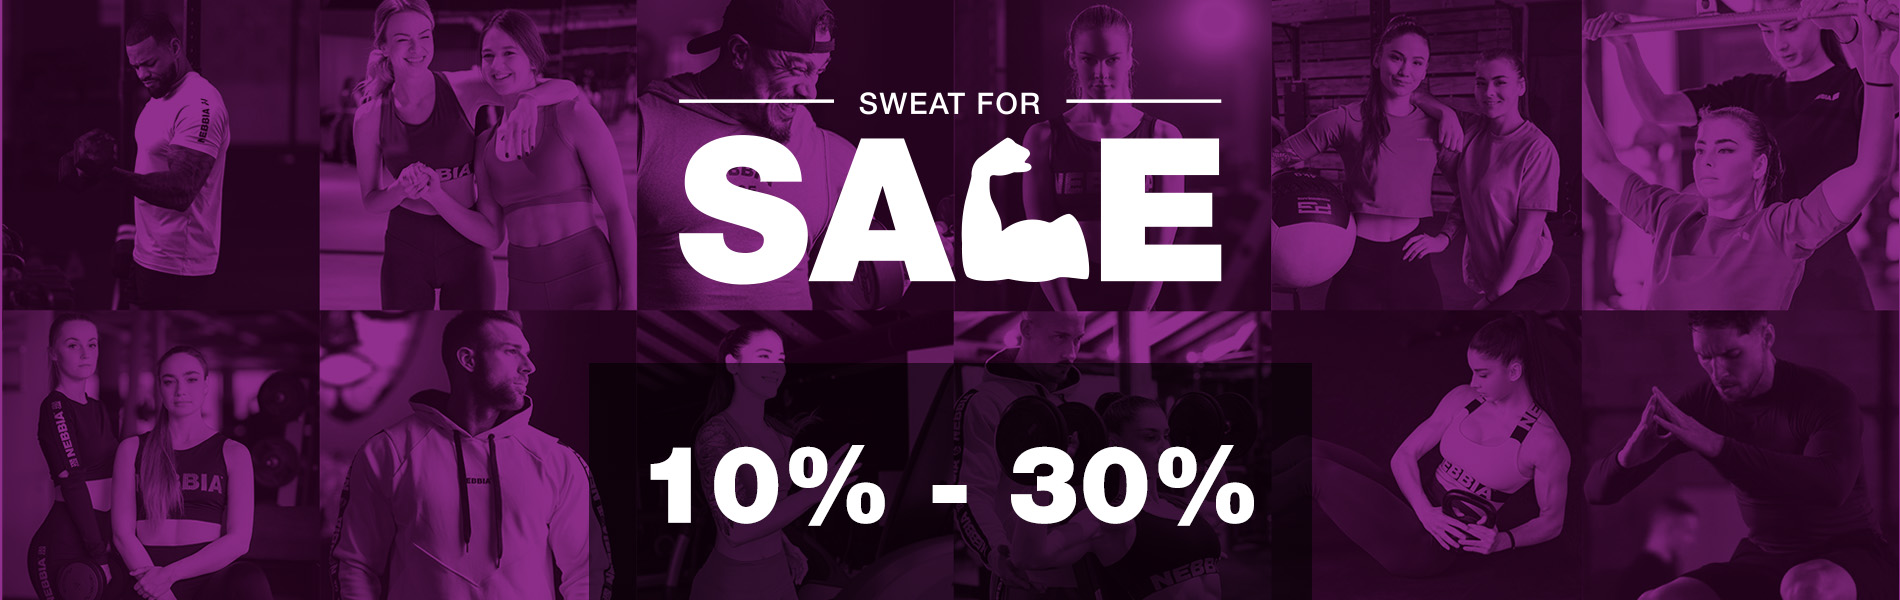 SWEAT FOR SALE from -10% to -30%